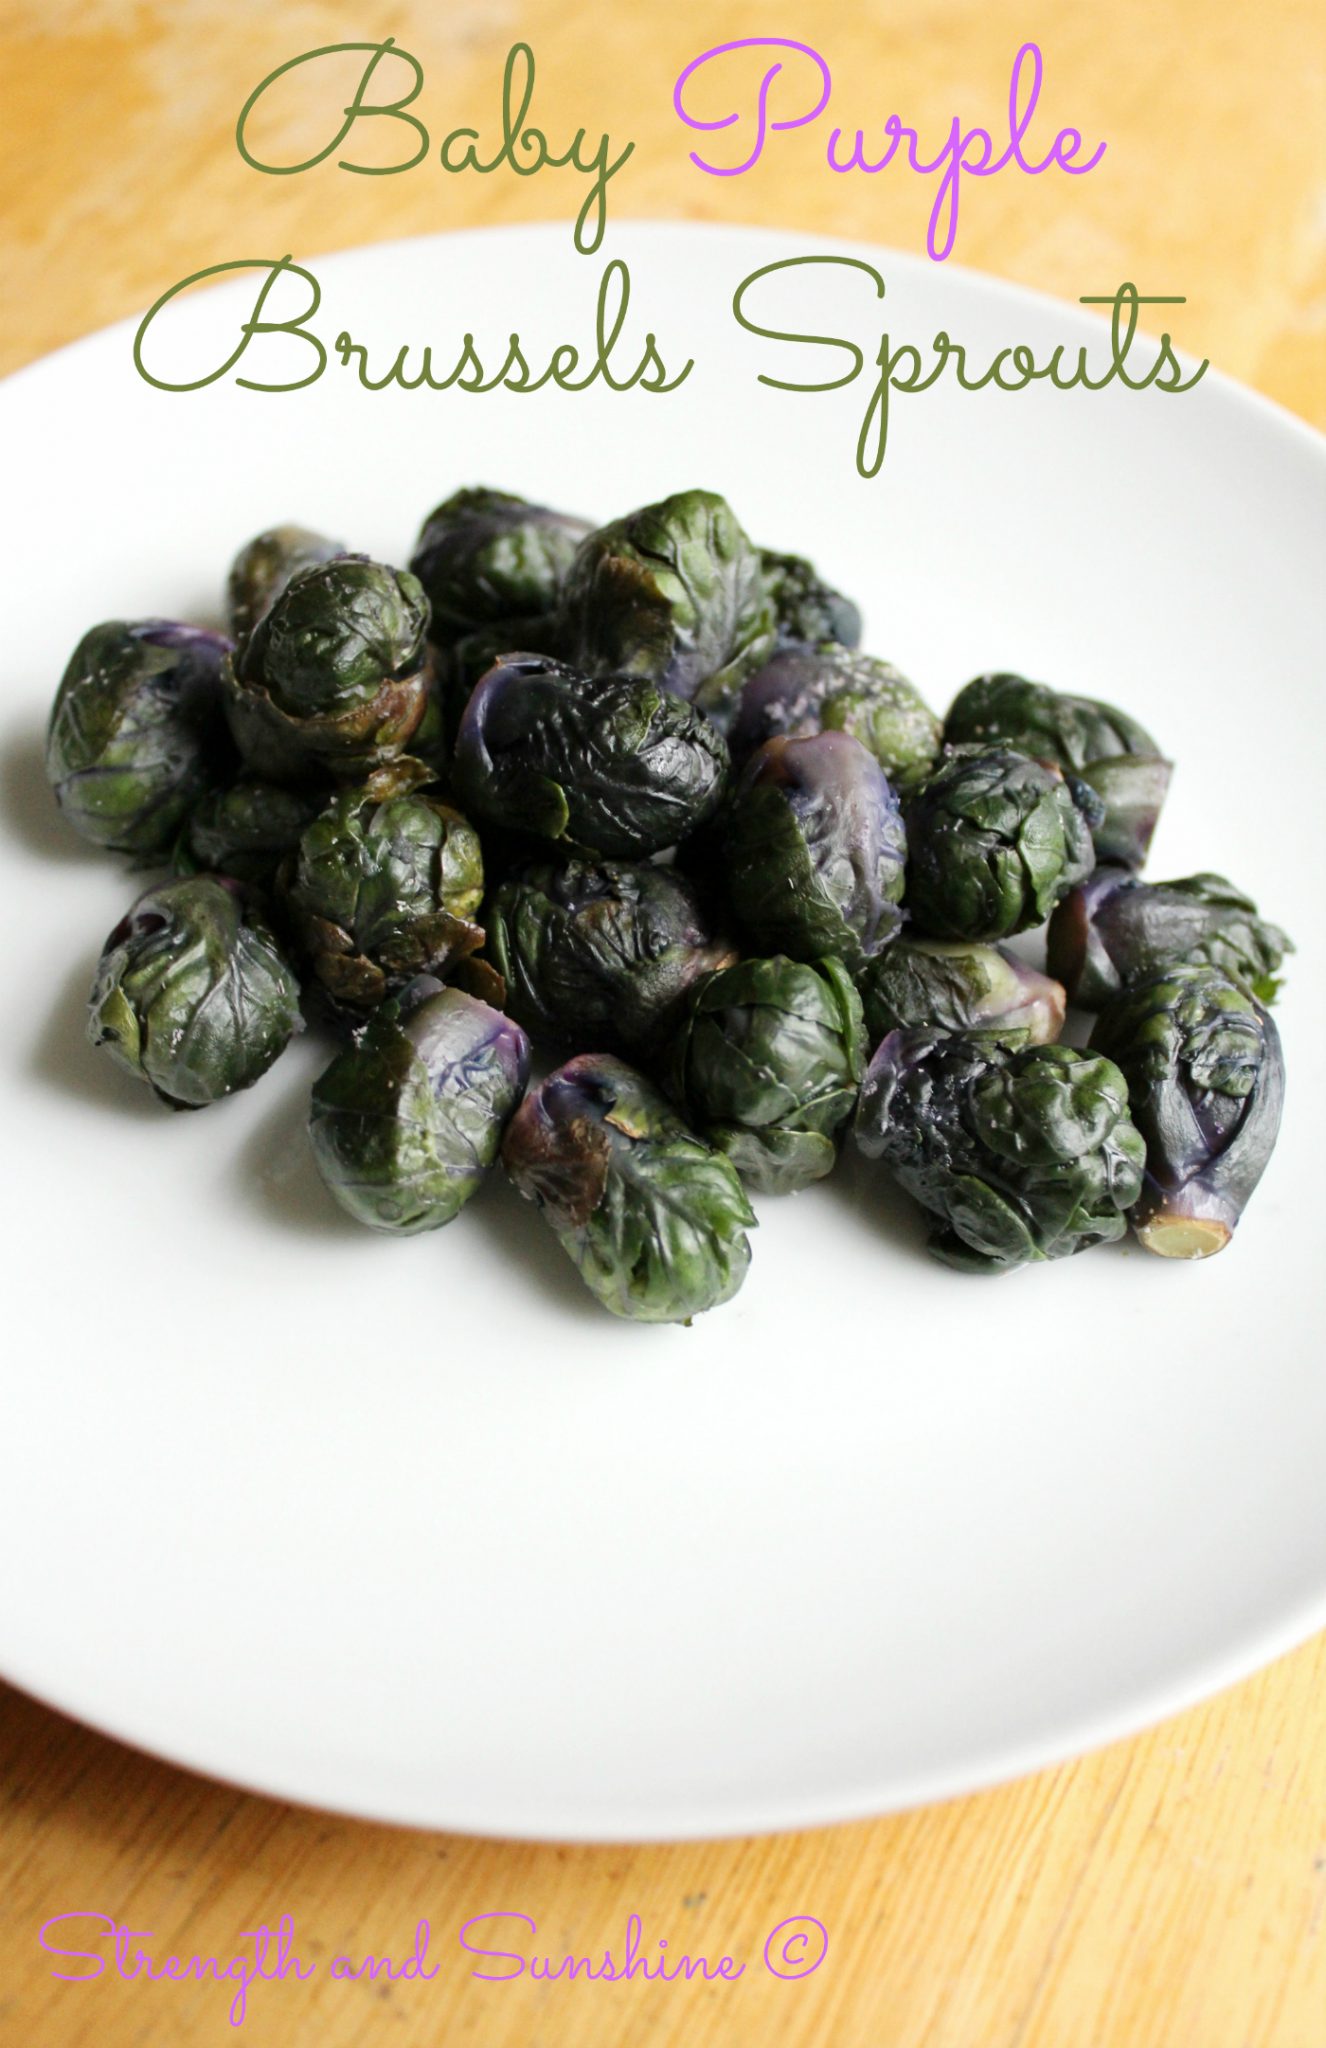 Baby Purple Brussels Sprouts | Strength and Sunshine @RebeccaGF666 #brusselssprouts #vegatables